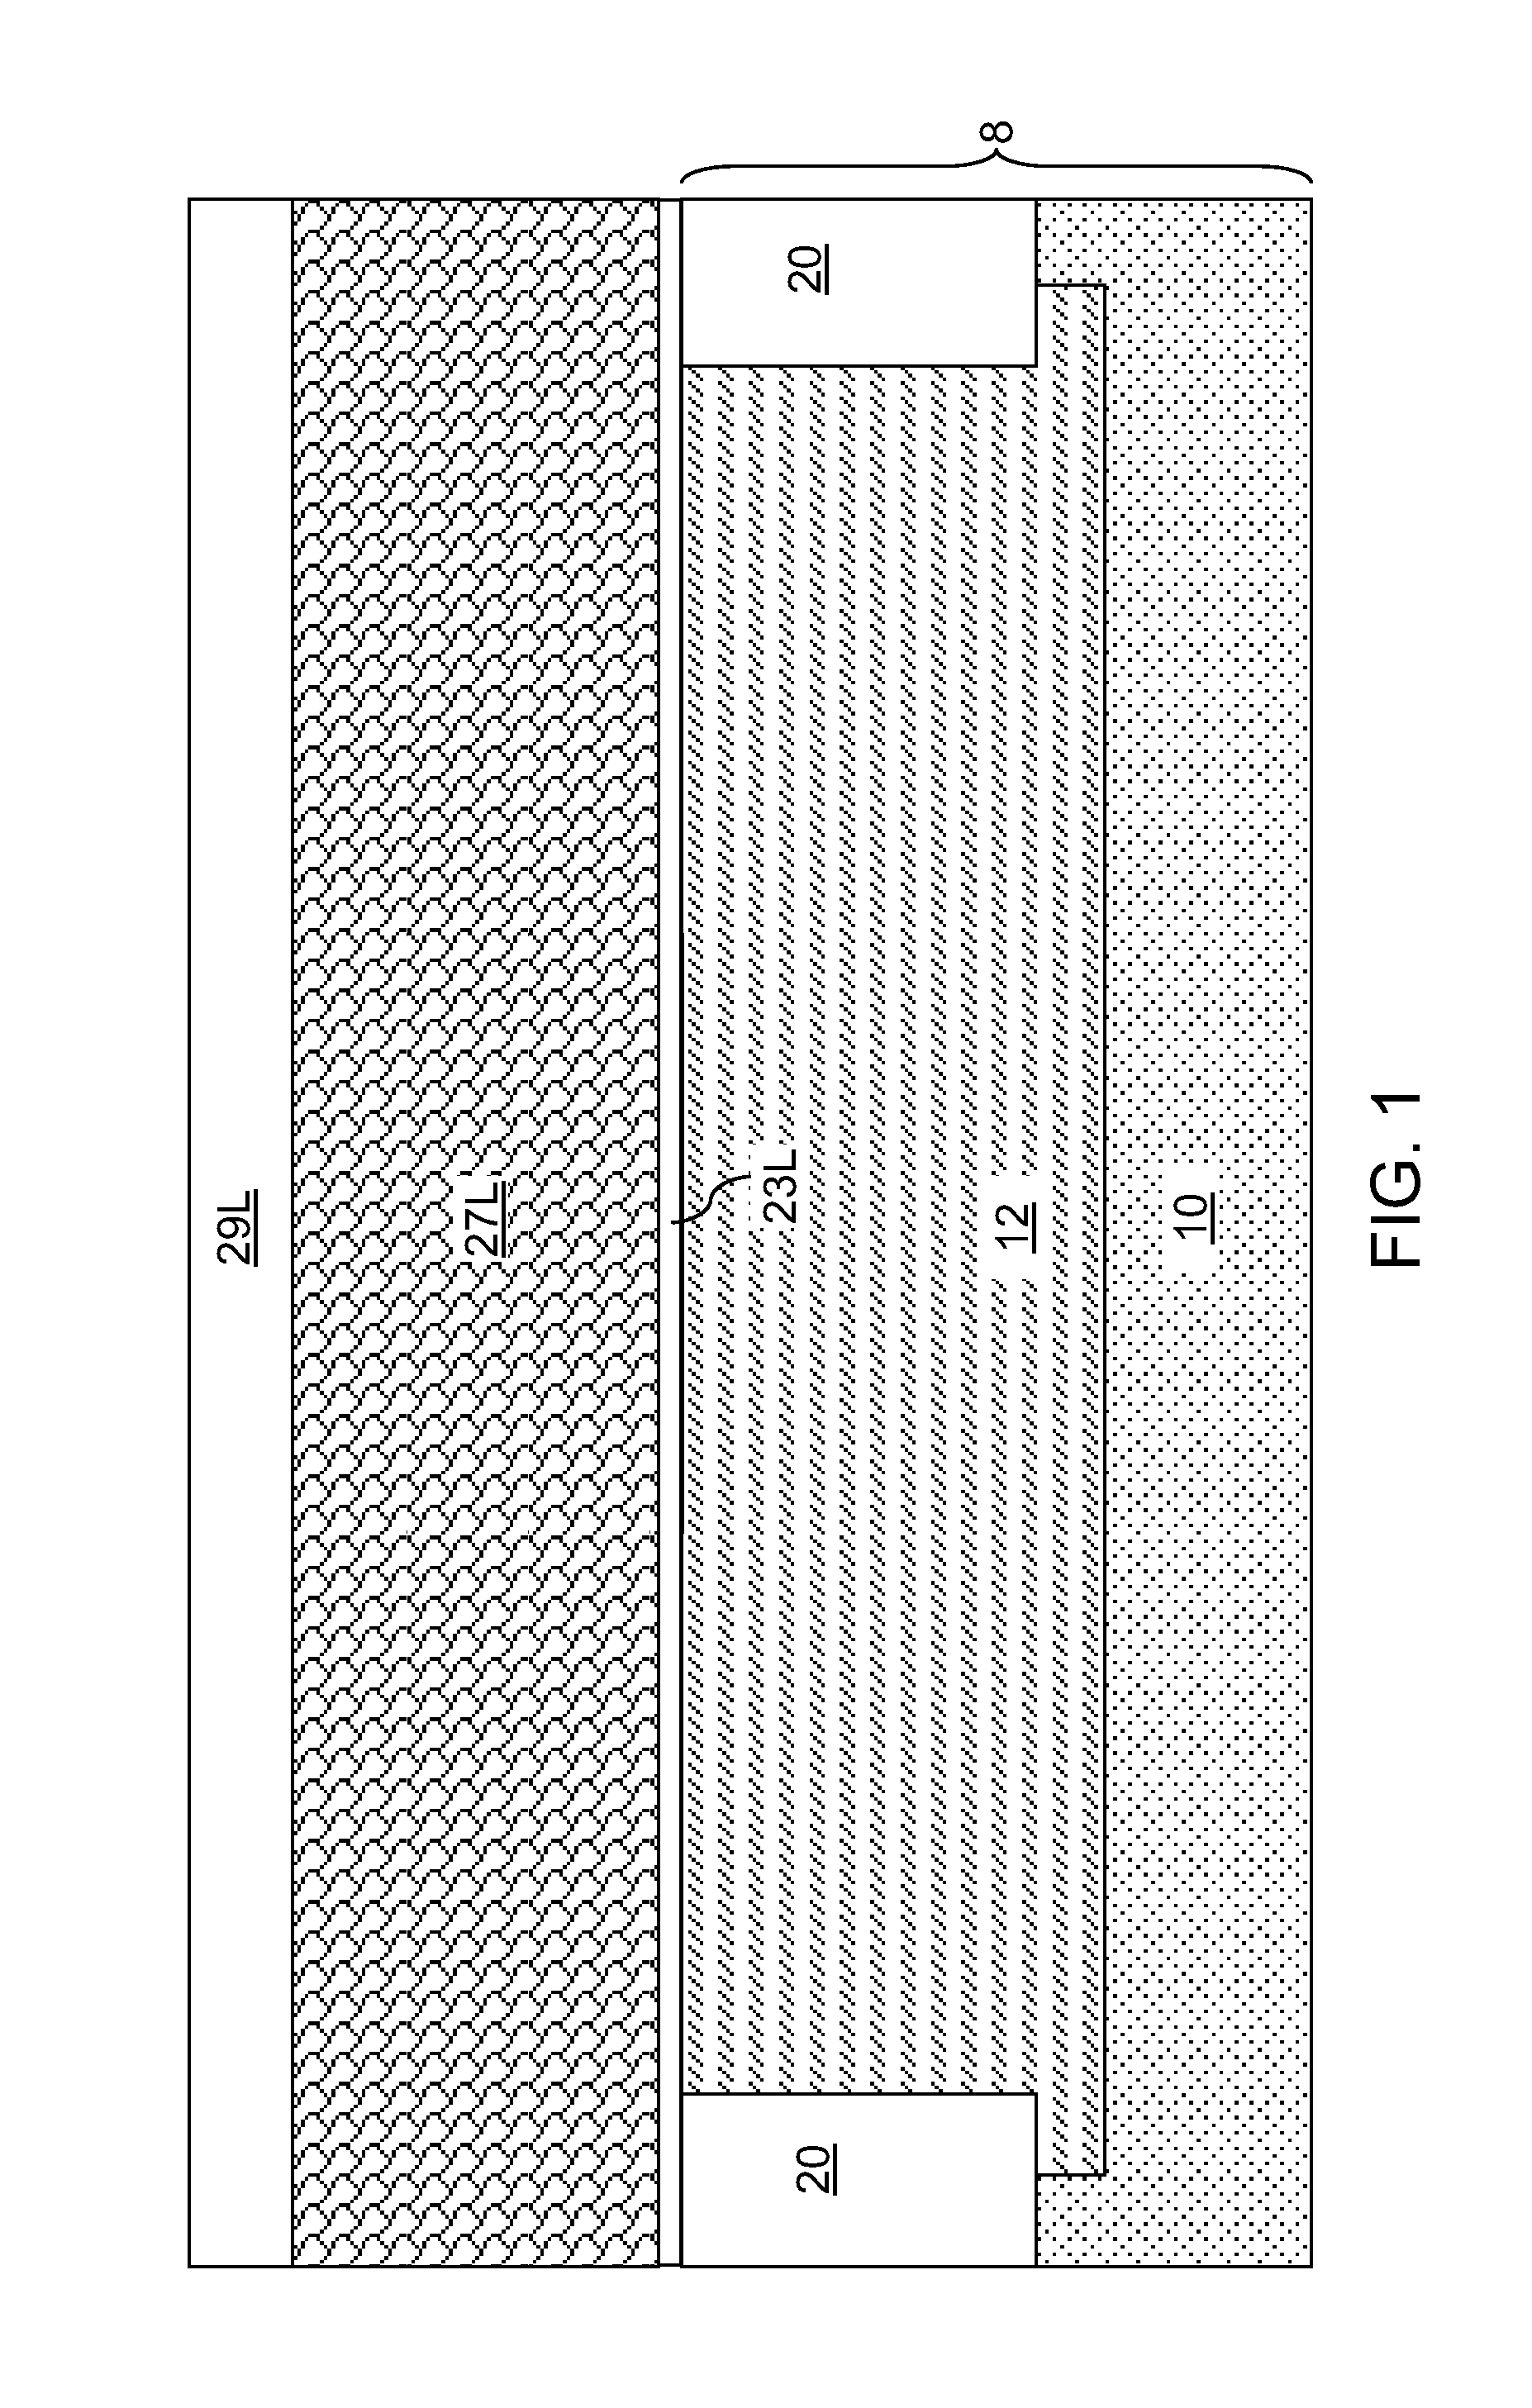 Stratified gate dielectric stack for gate dielectric leakage reduction